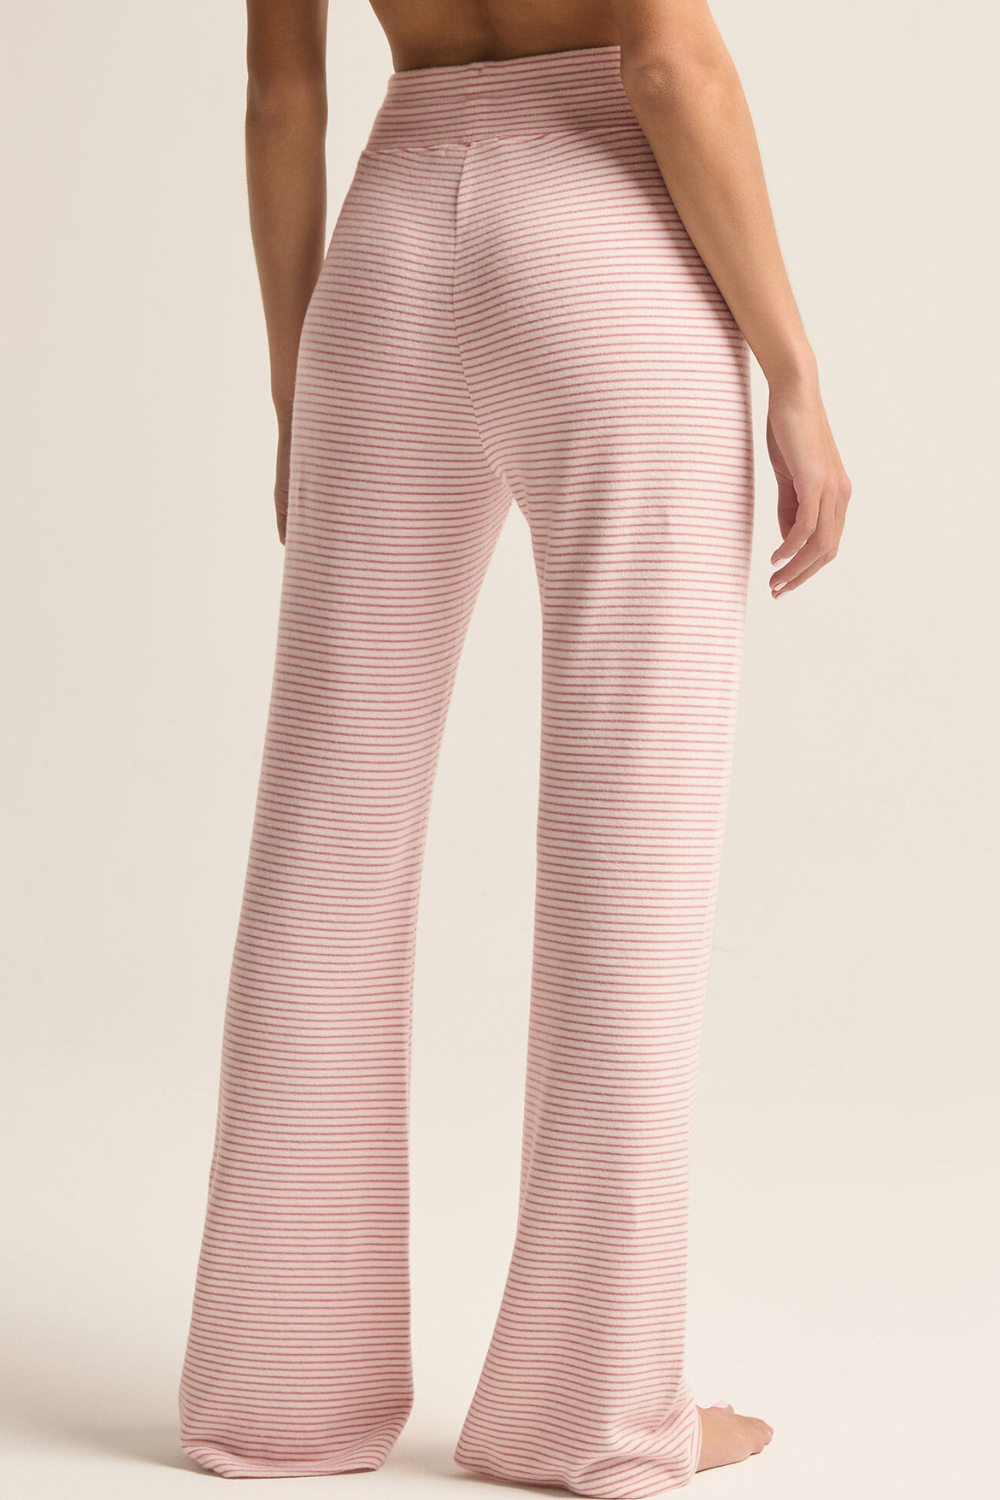 Z Supply In The Clouds Stripe Pant